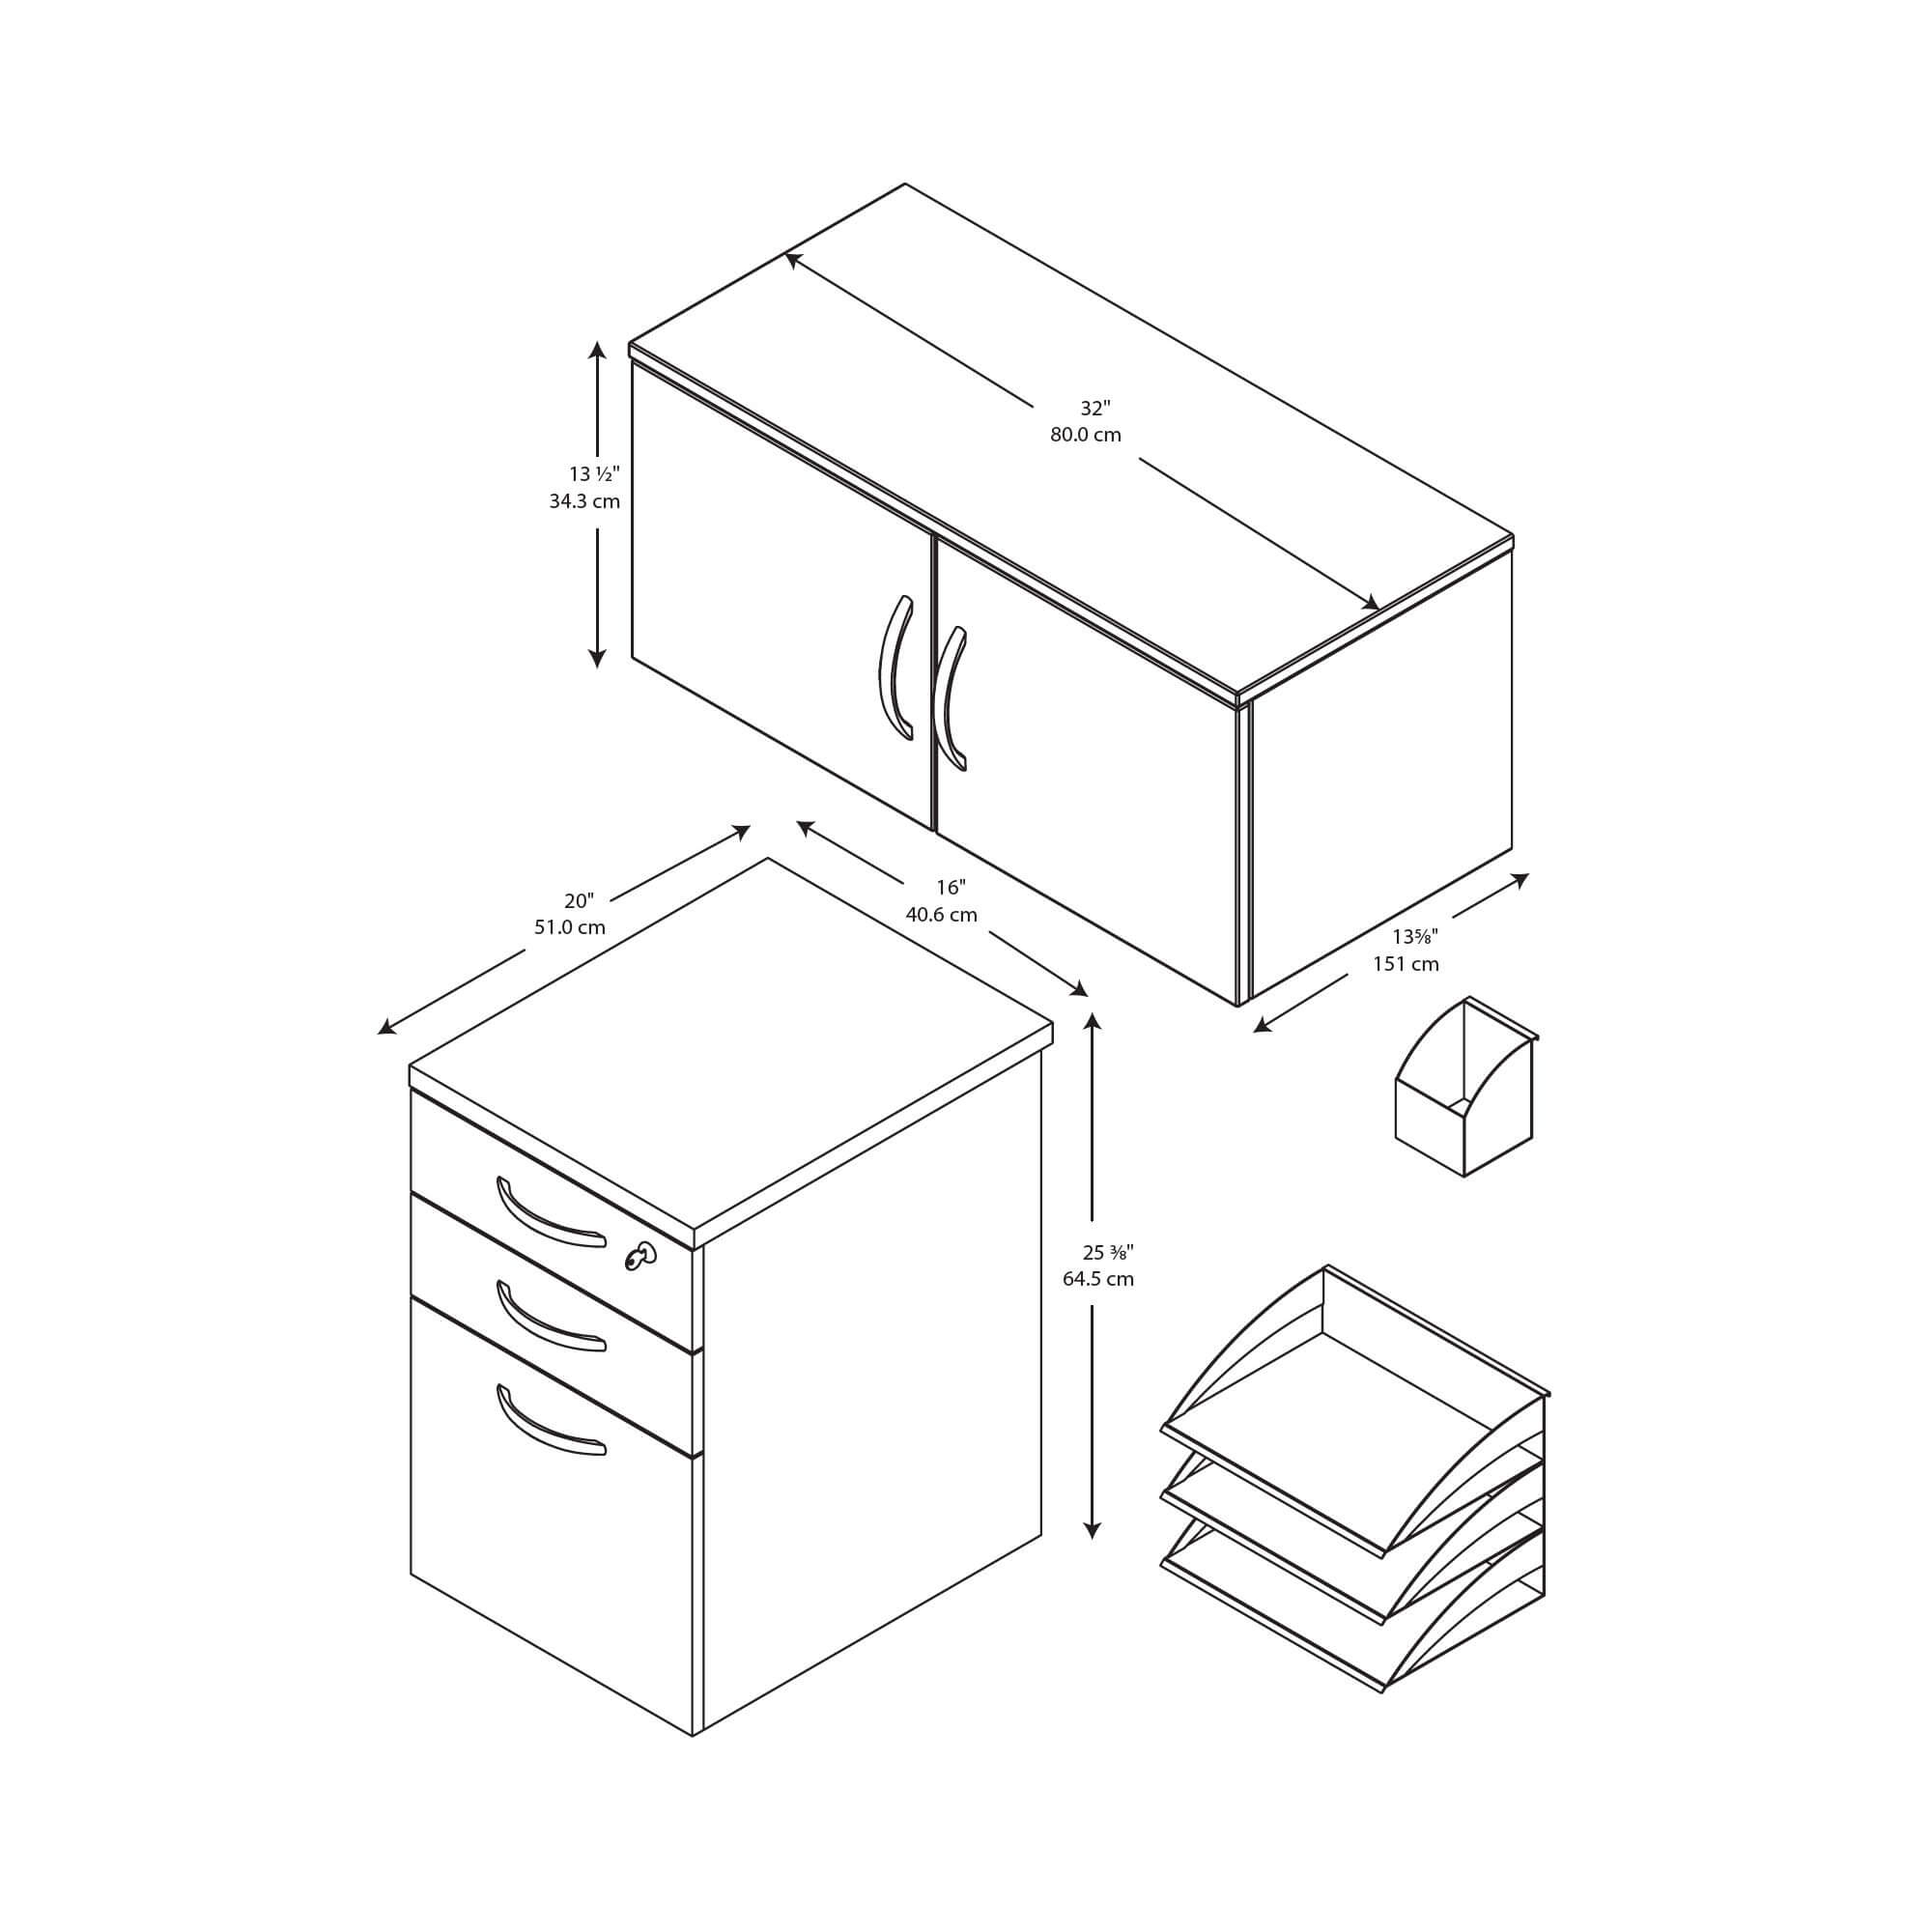 Office cubical storage drawing